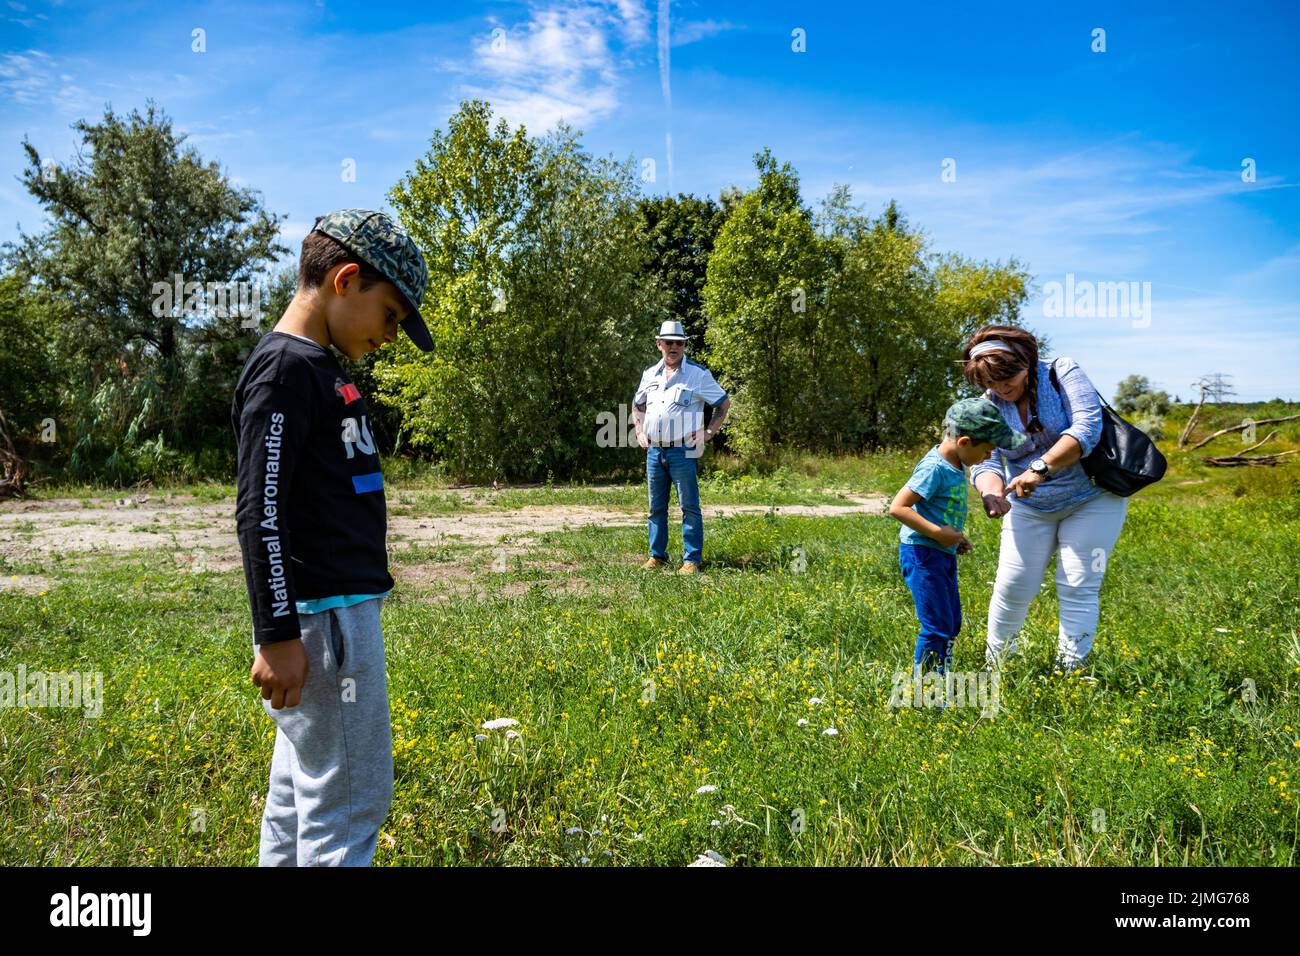 Adults and two children looking for something in green grass and weeds on a warm summer day by the Bernata street. Stock Photo